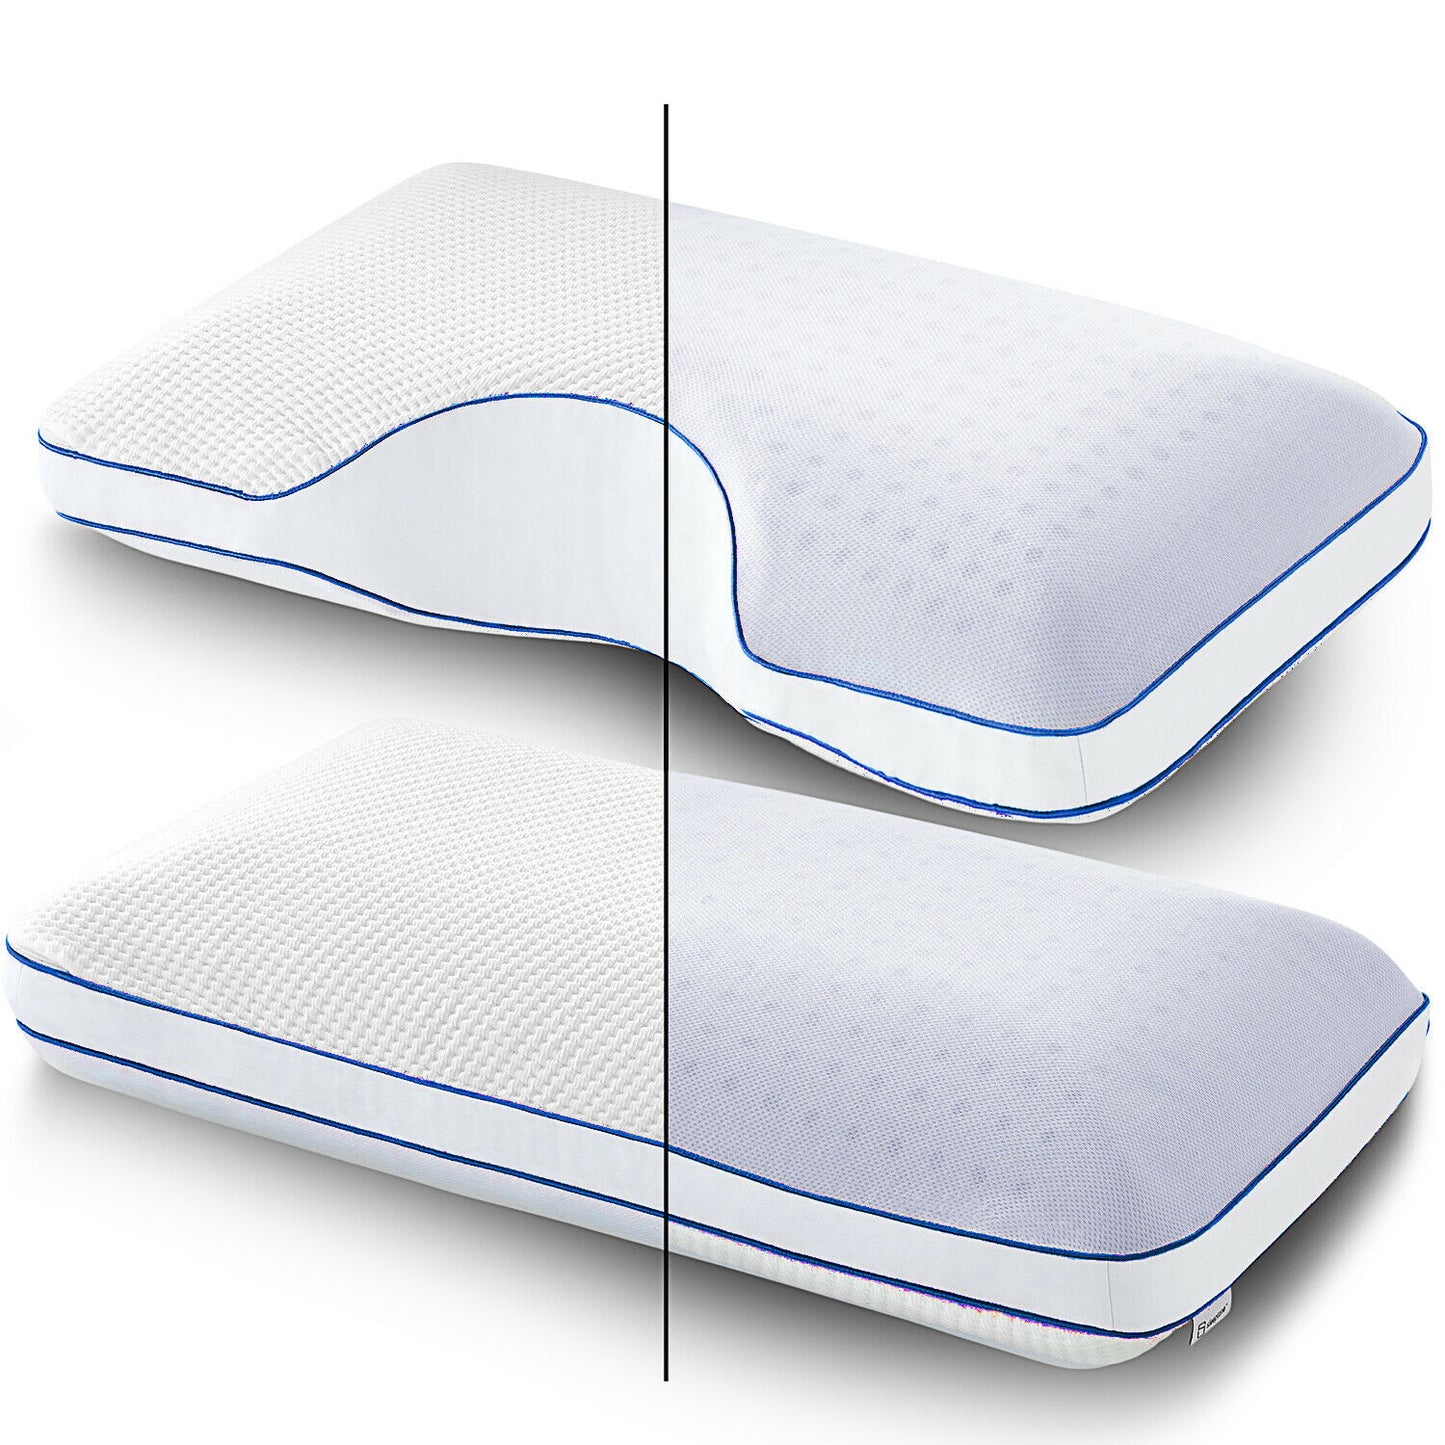 Pillows - Memory Foam Pillow With Cooling Gel - Side Sleeper, King, or Queen -